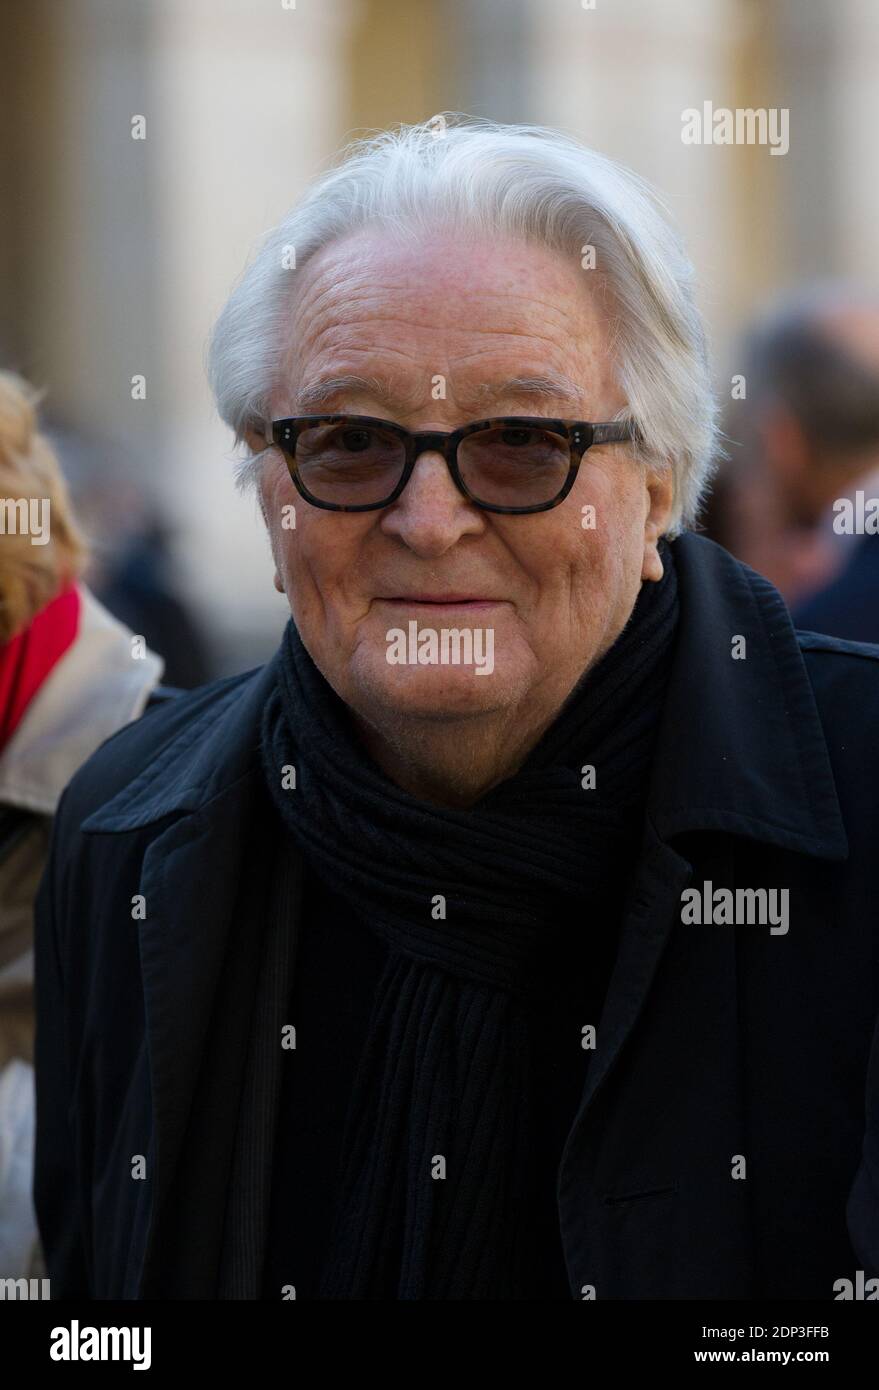 Former French Foreign Minister Roland Dumas attends a state funeral ceremony for late French World War II hero Jean-Louis Cremieux-Brilhac at the Hotel des Invalides in Paris, France on April 15, 2015. A towering figure in the French Resistance, Cremieux-Brilhac, one of the first to condemn the Nazi gas chambers, died on April 8, 2015 aged 98. Photo by Thierry Orban/ABACAPRESS.COM Stock Photo